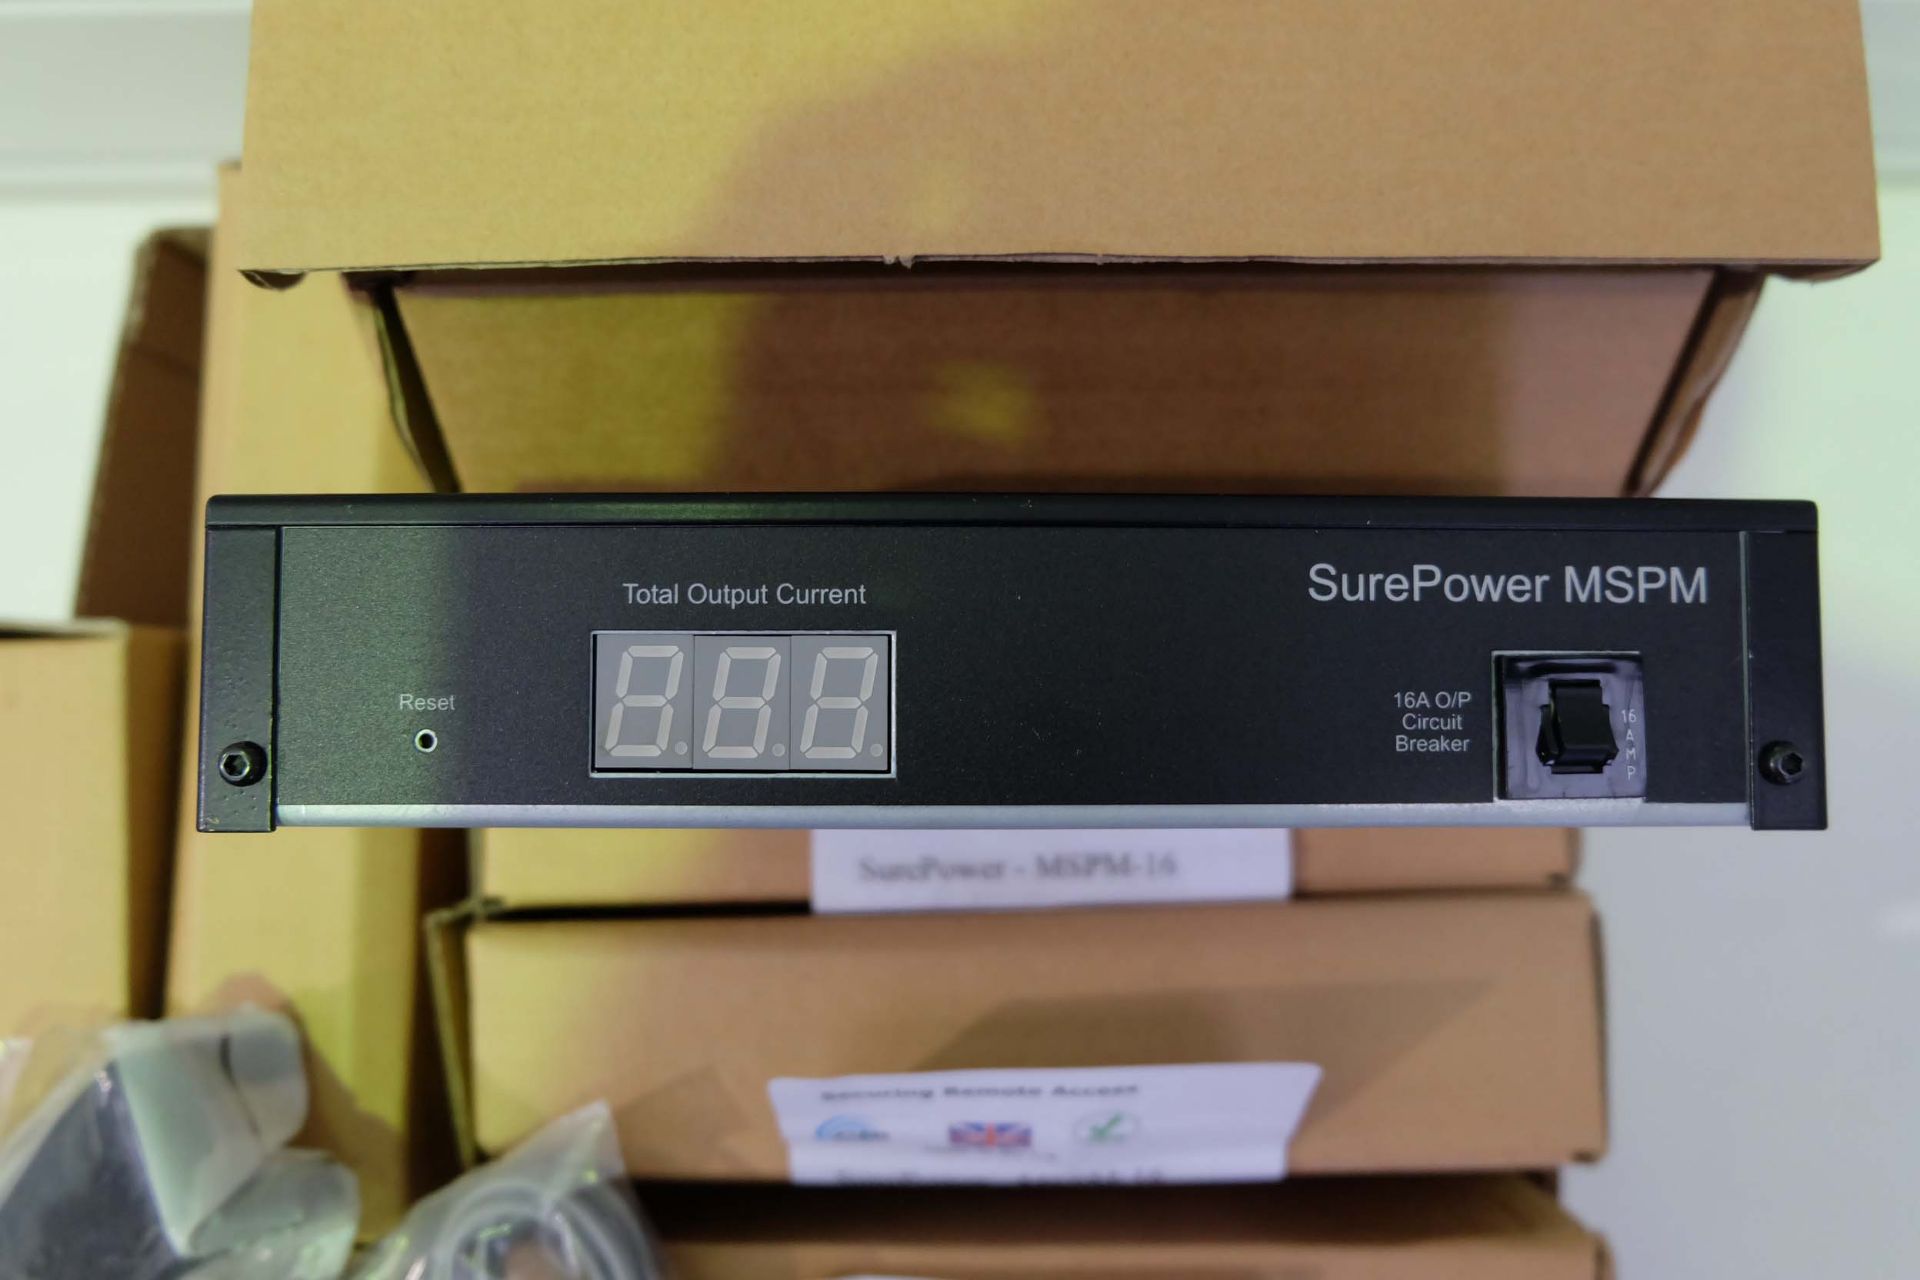 8 x Sure Power -MSPM - 16 Power Packs With 16 Amp Circuit Breaker - Image 2 of 5